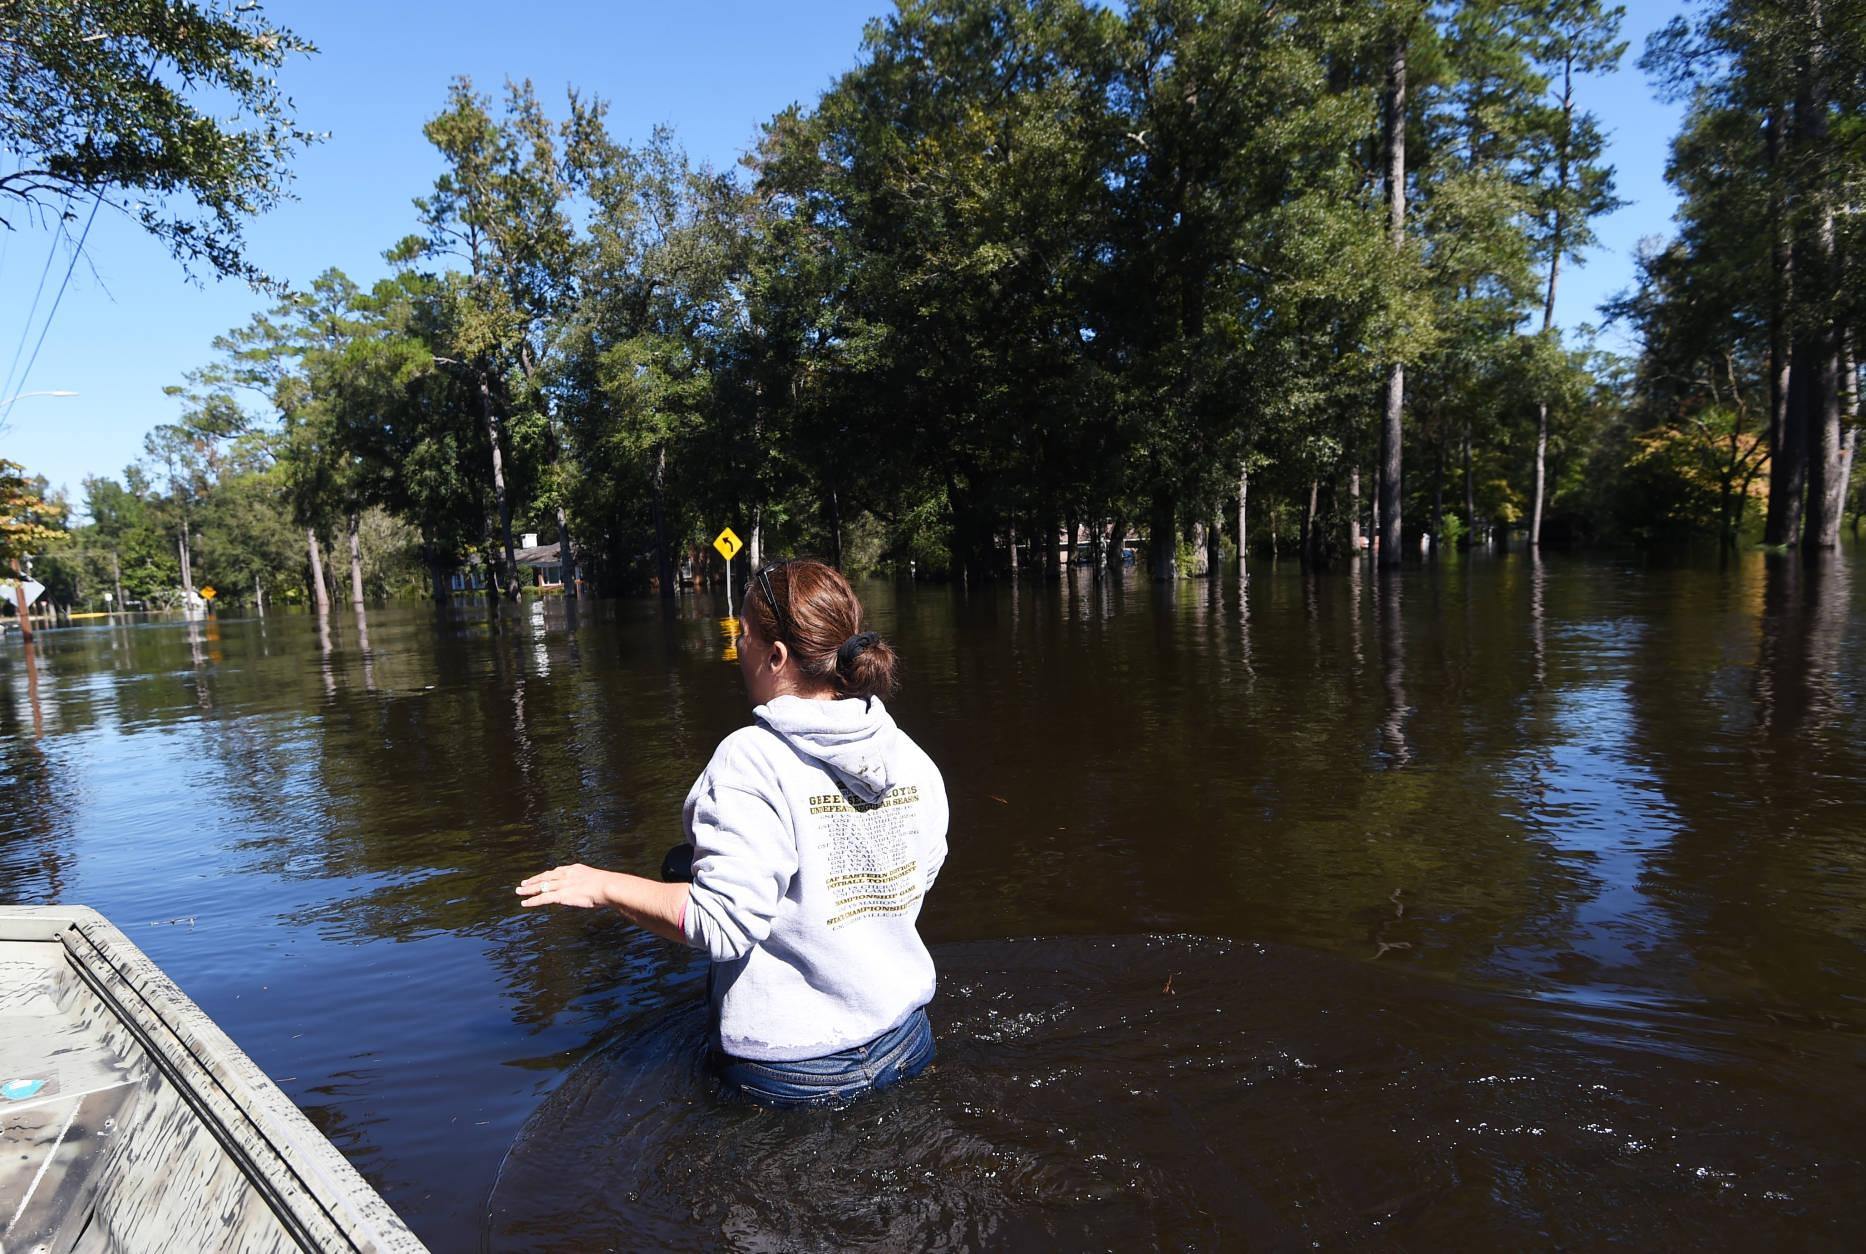 Natalie McDowell, left, walks to her flooded home on Tuesday, Oct. 11, 2016, in Nichols, S.C. About 150 people were rescued by boats from flooding in the riverside village of Nichols on Monday. (AP Photo/Rainier Ehrhardt)